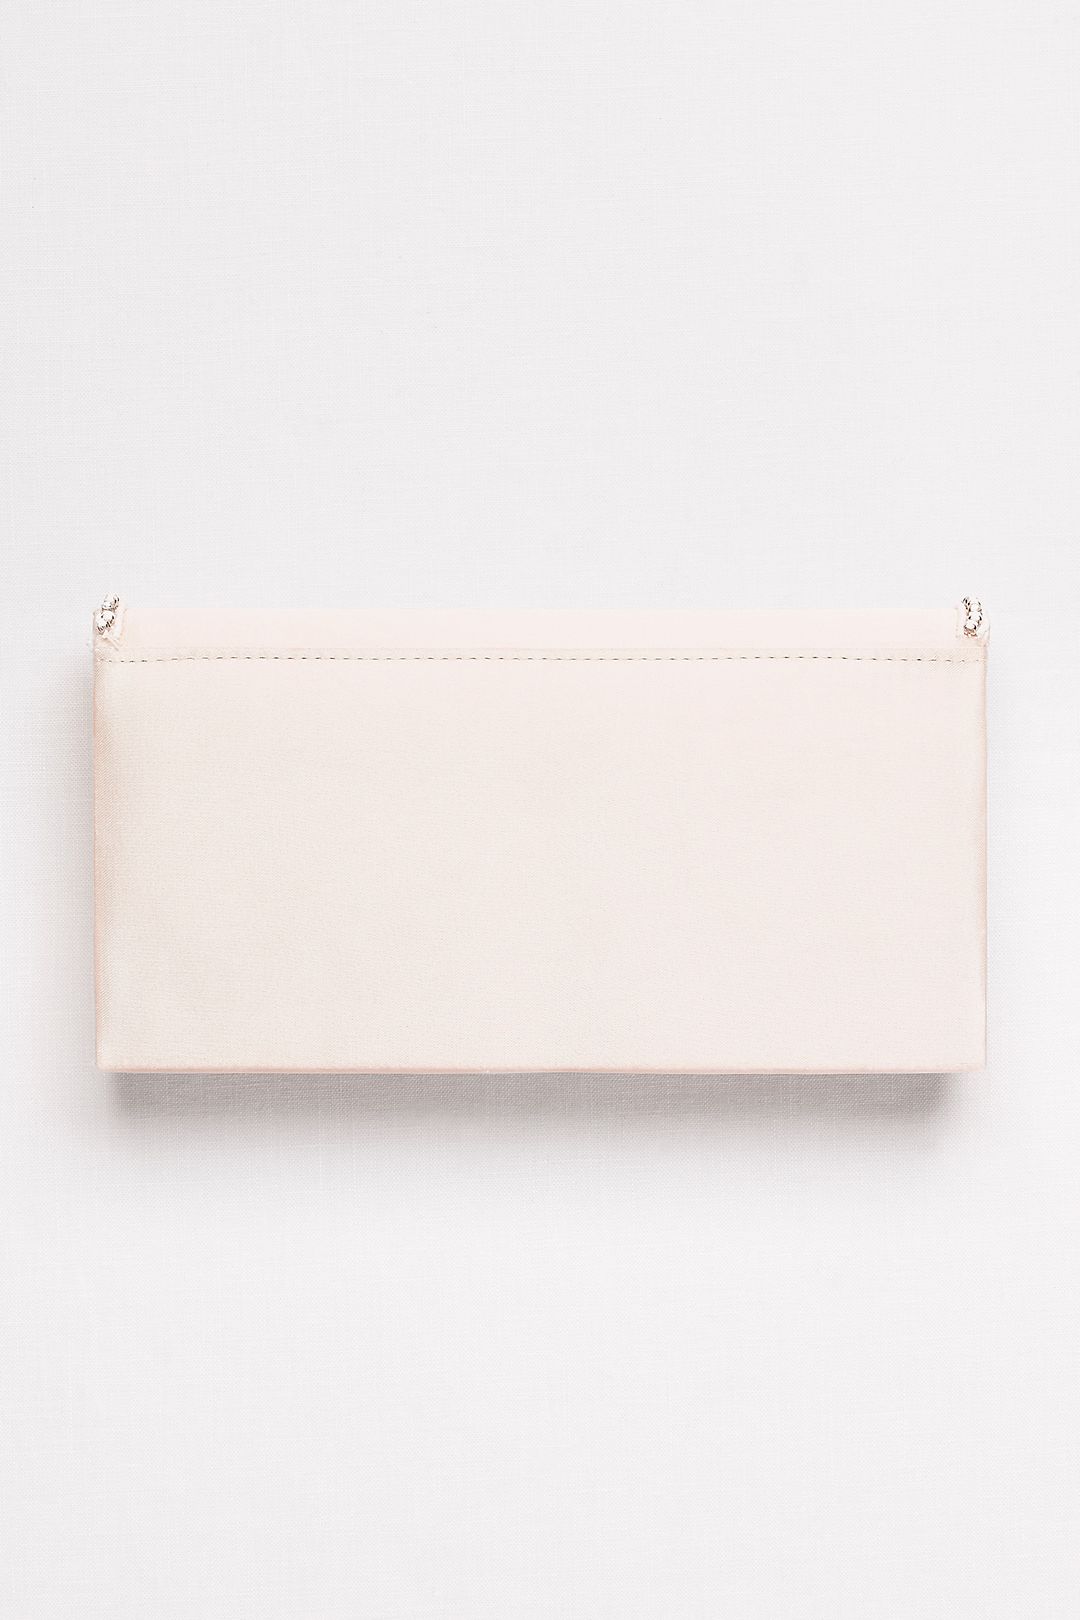 Hard-Sided Satin Clutch with White Beading Image 2